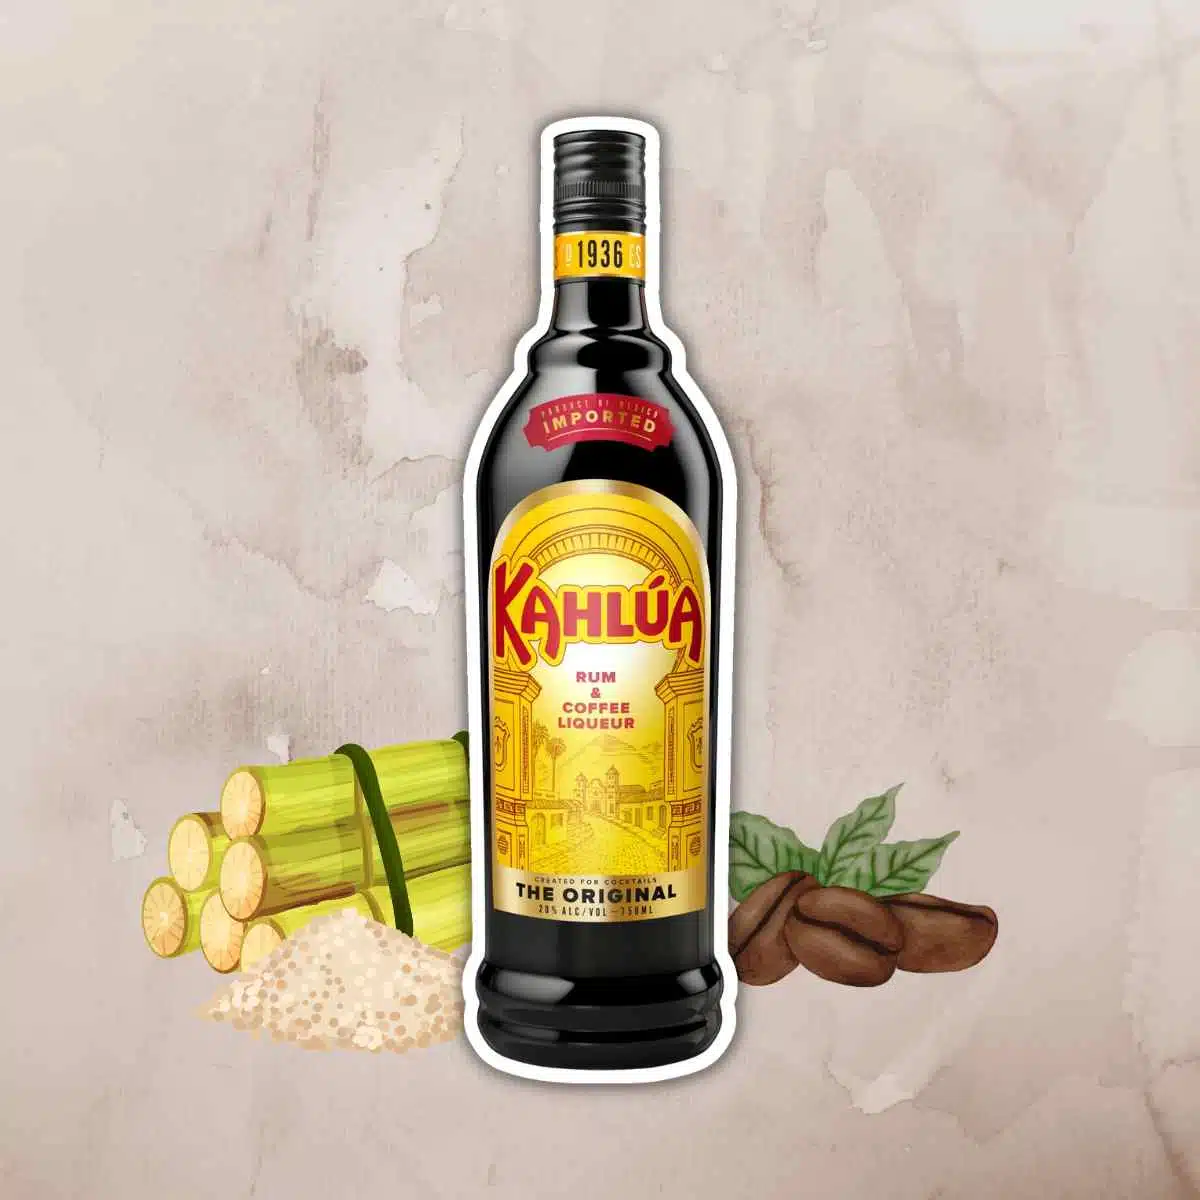 Kahlua bottle with arabica beans and sugar cane in the background